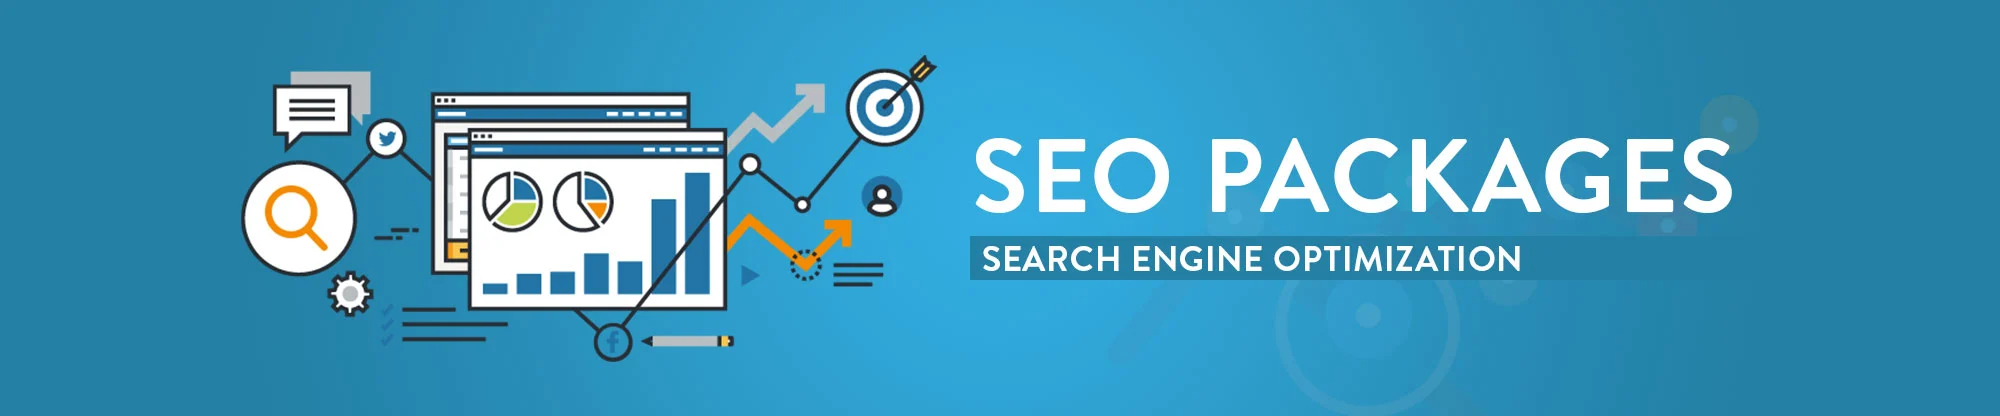 seo reseller packages